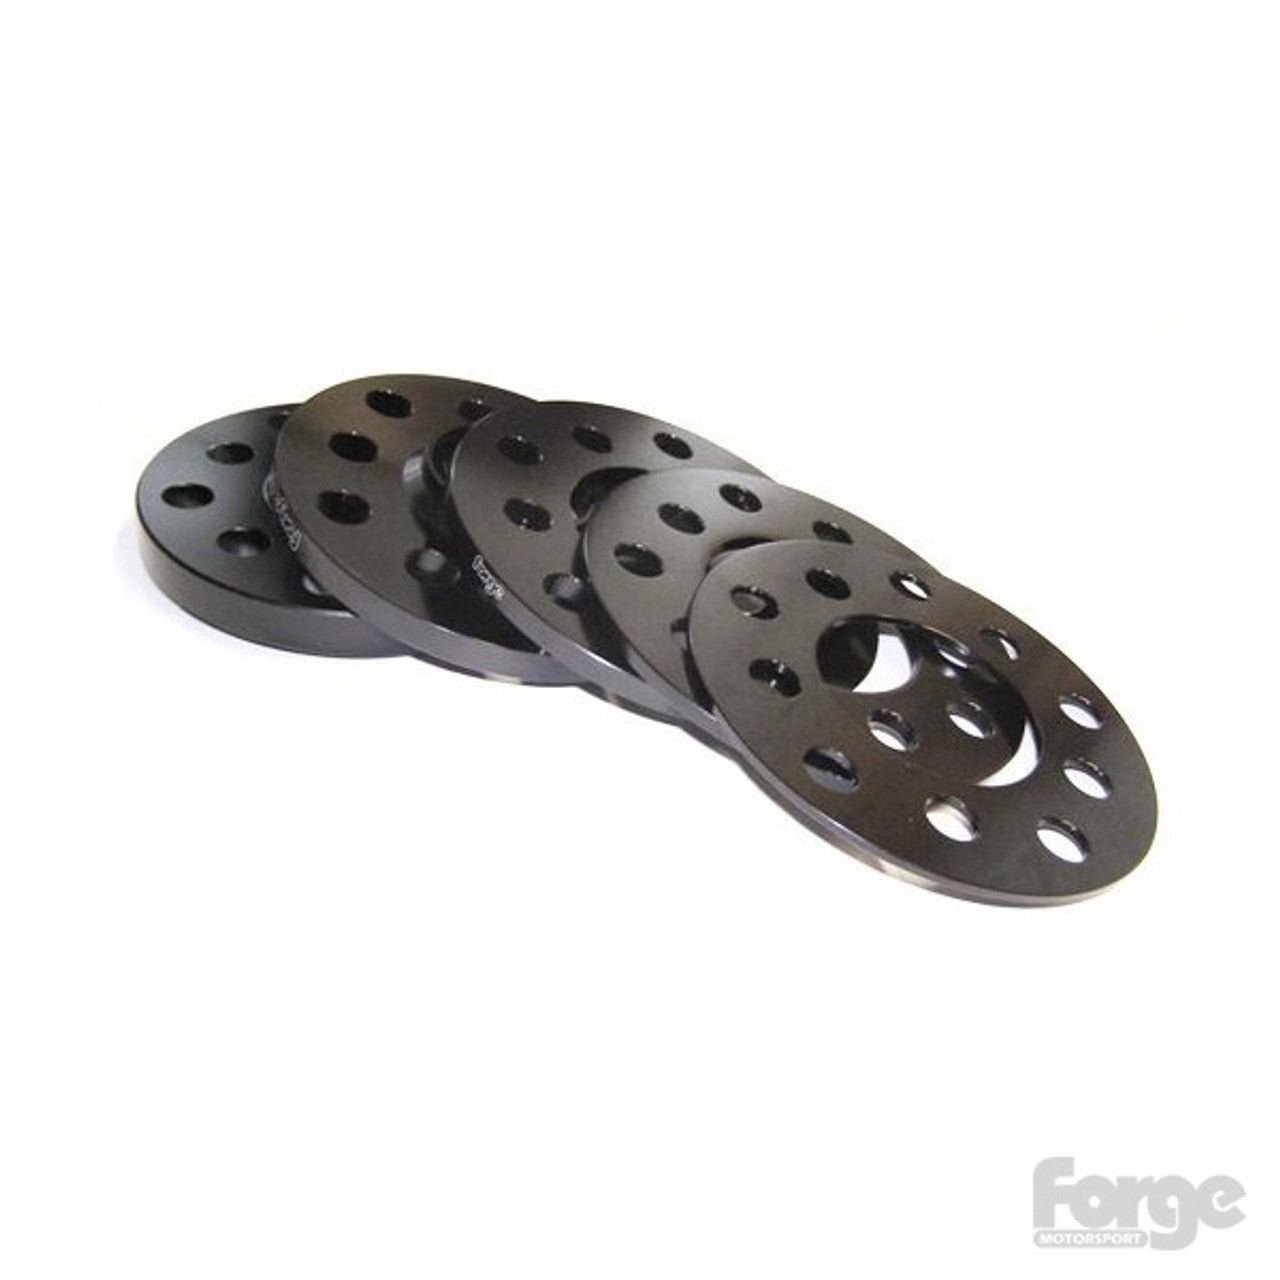 Forge 16mm (per side) hubcentric